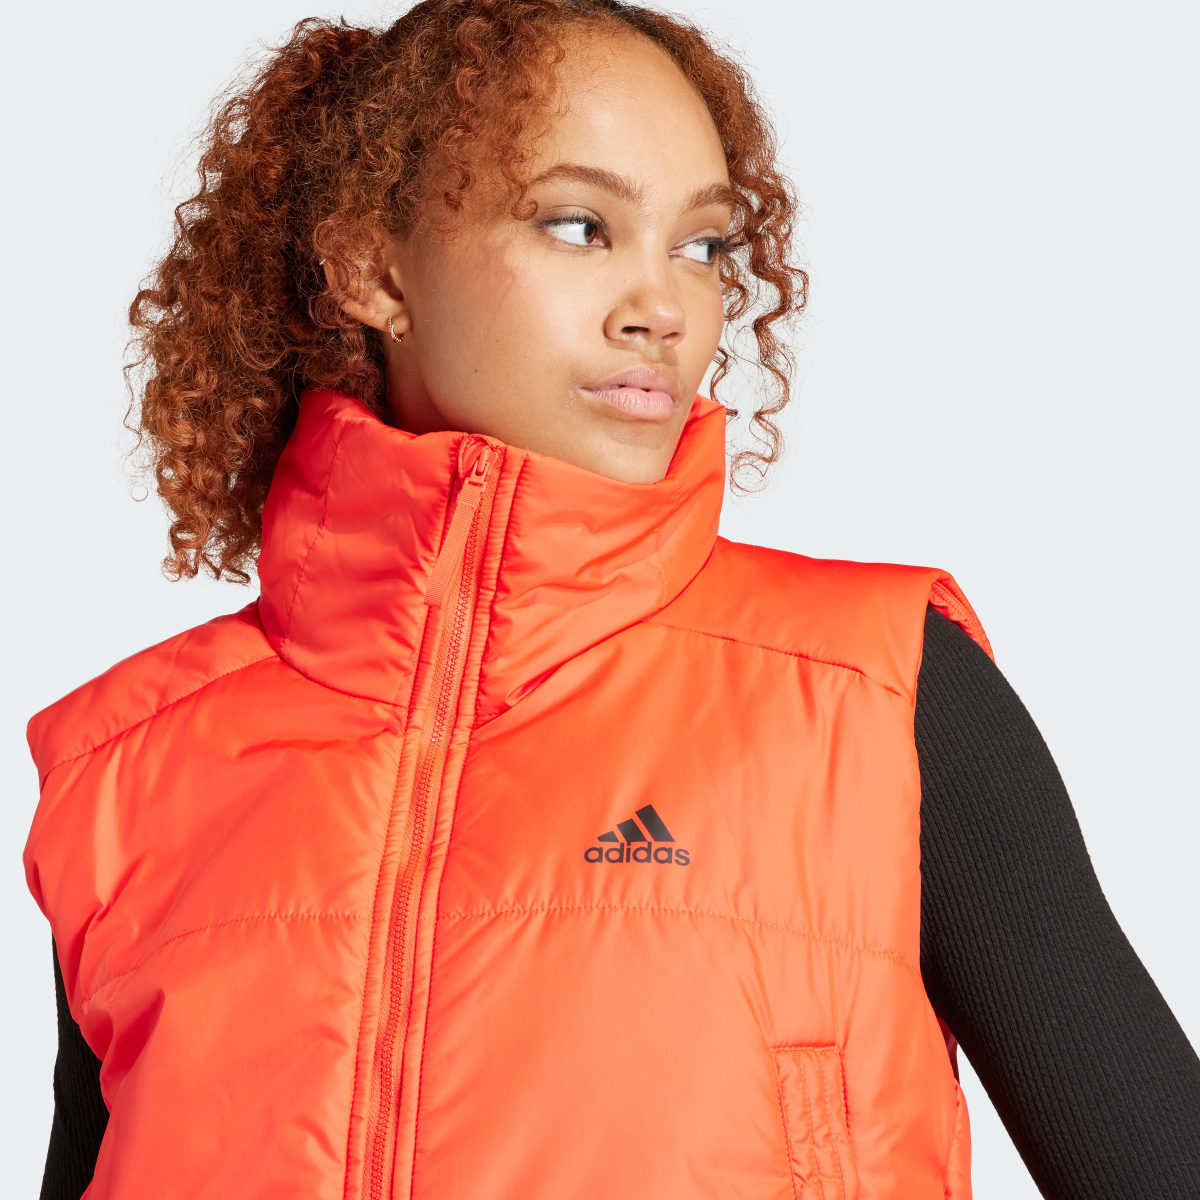 Adidas 3-Stripes Insulated Vest. 6